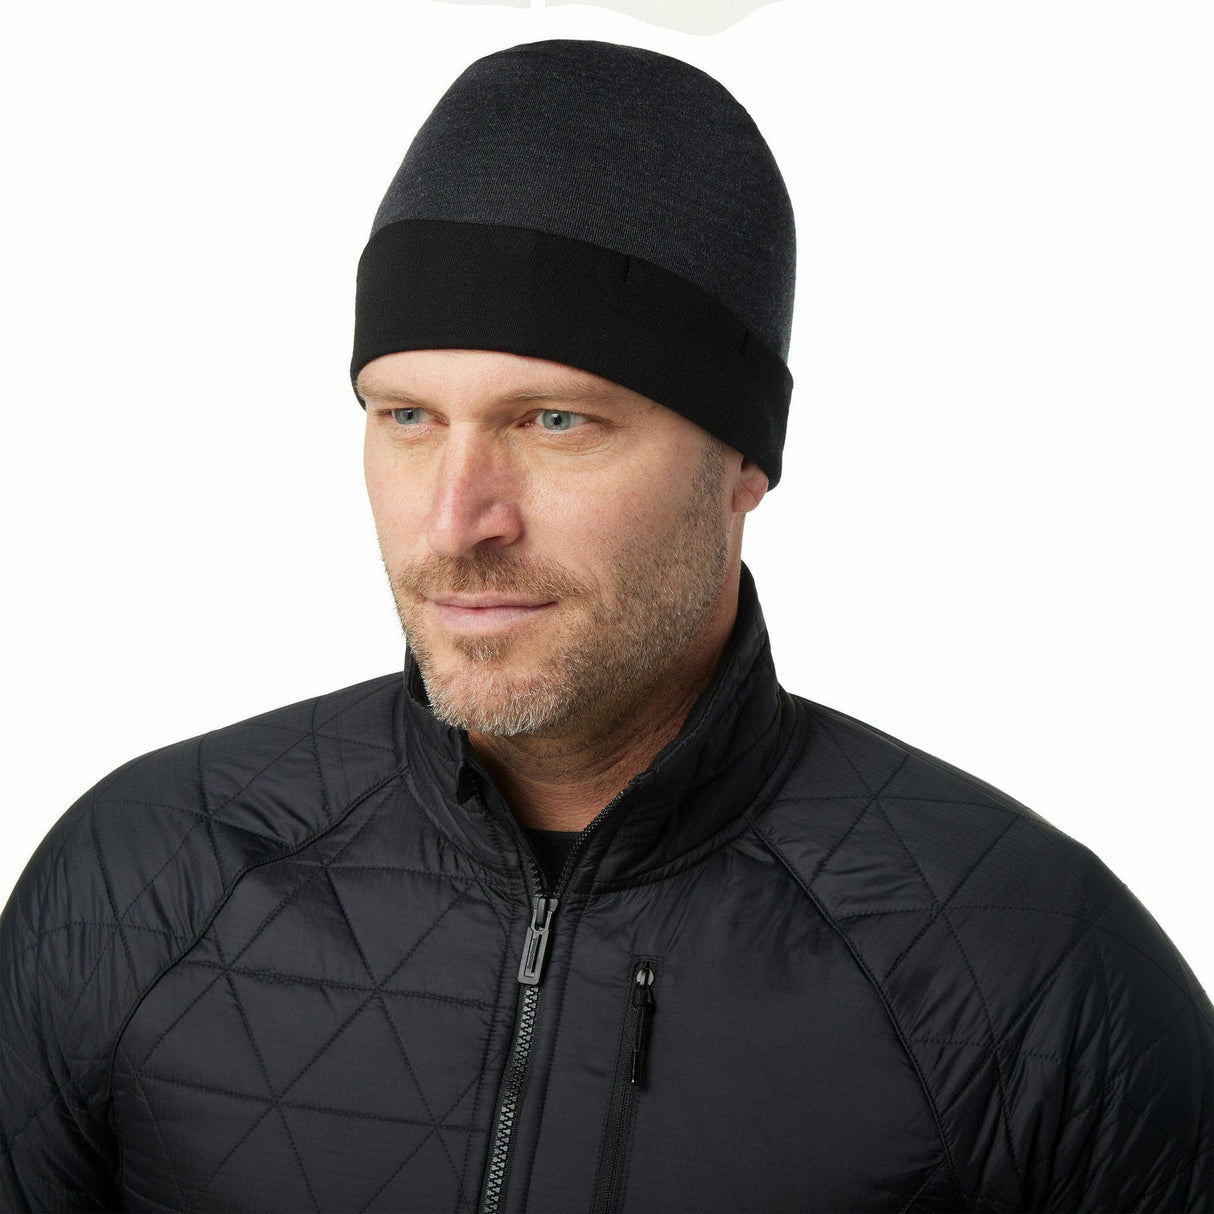 Smartwool Thermal Merino Stowe Pocket Beanie  -  One Size Fits Most / Black